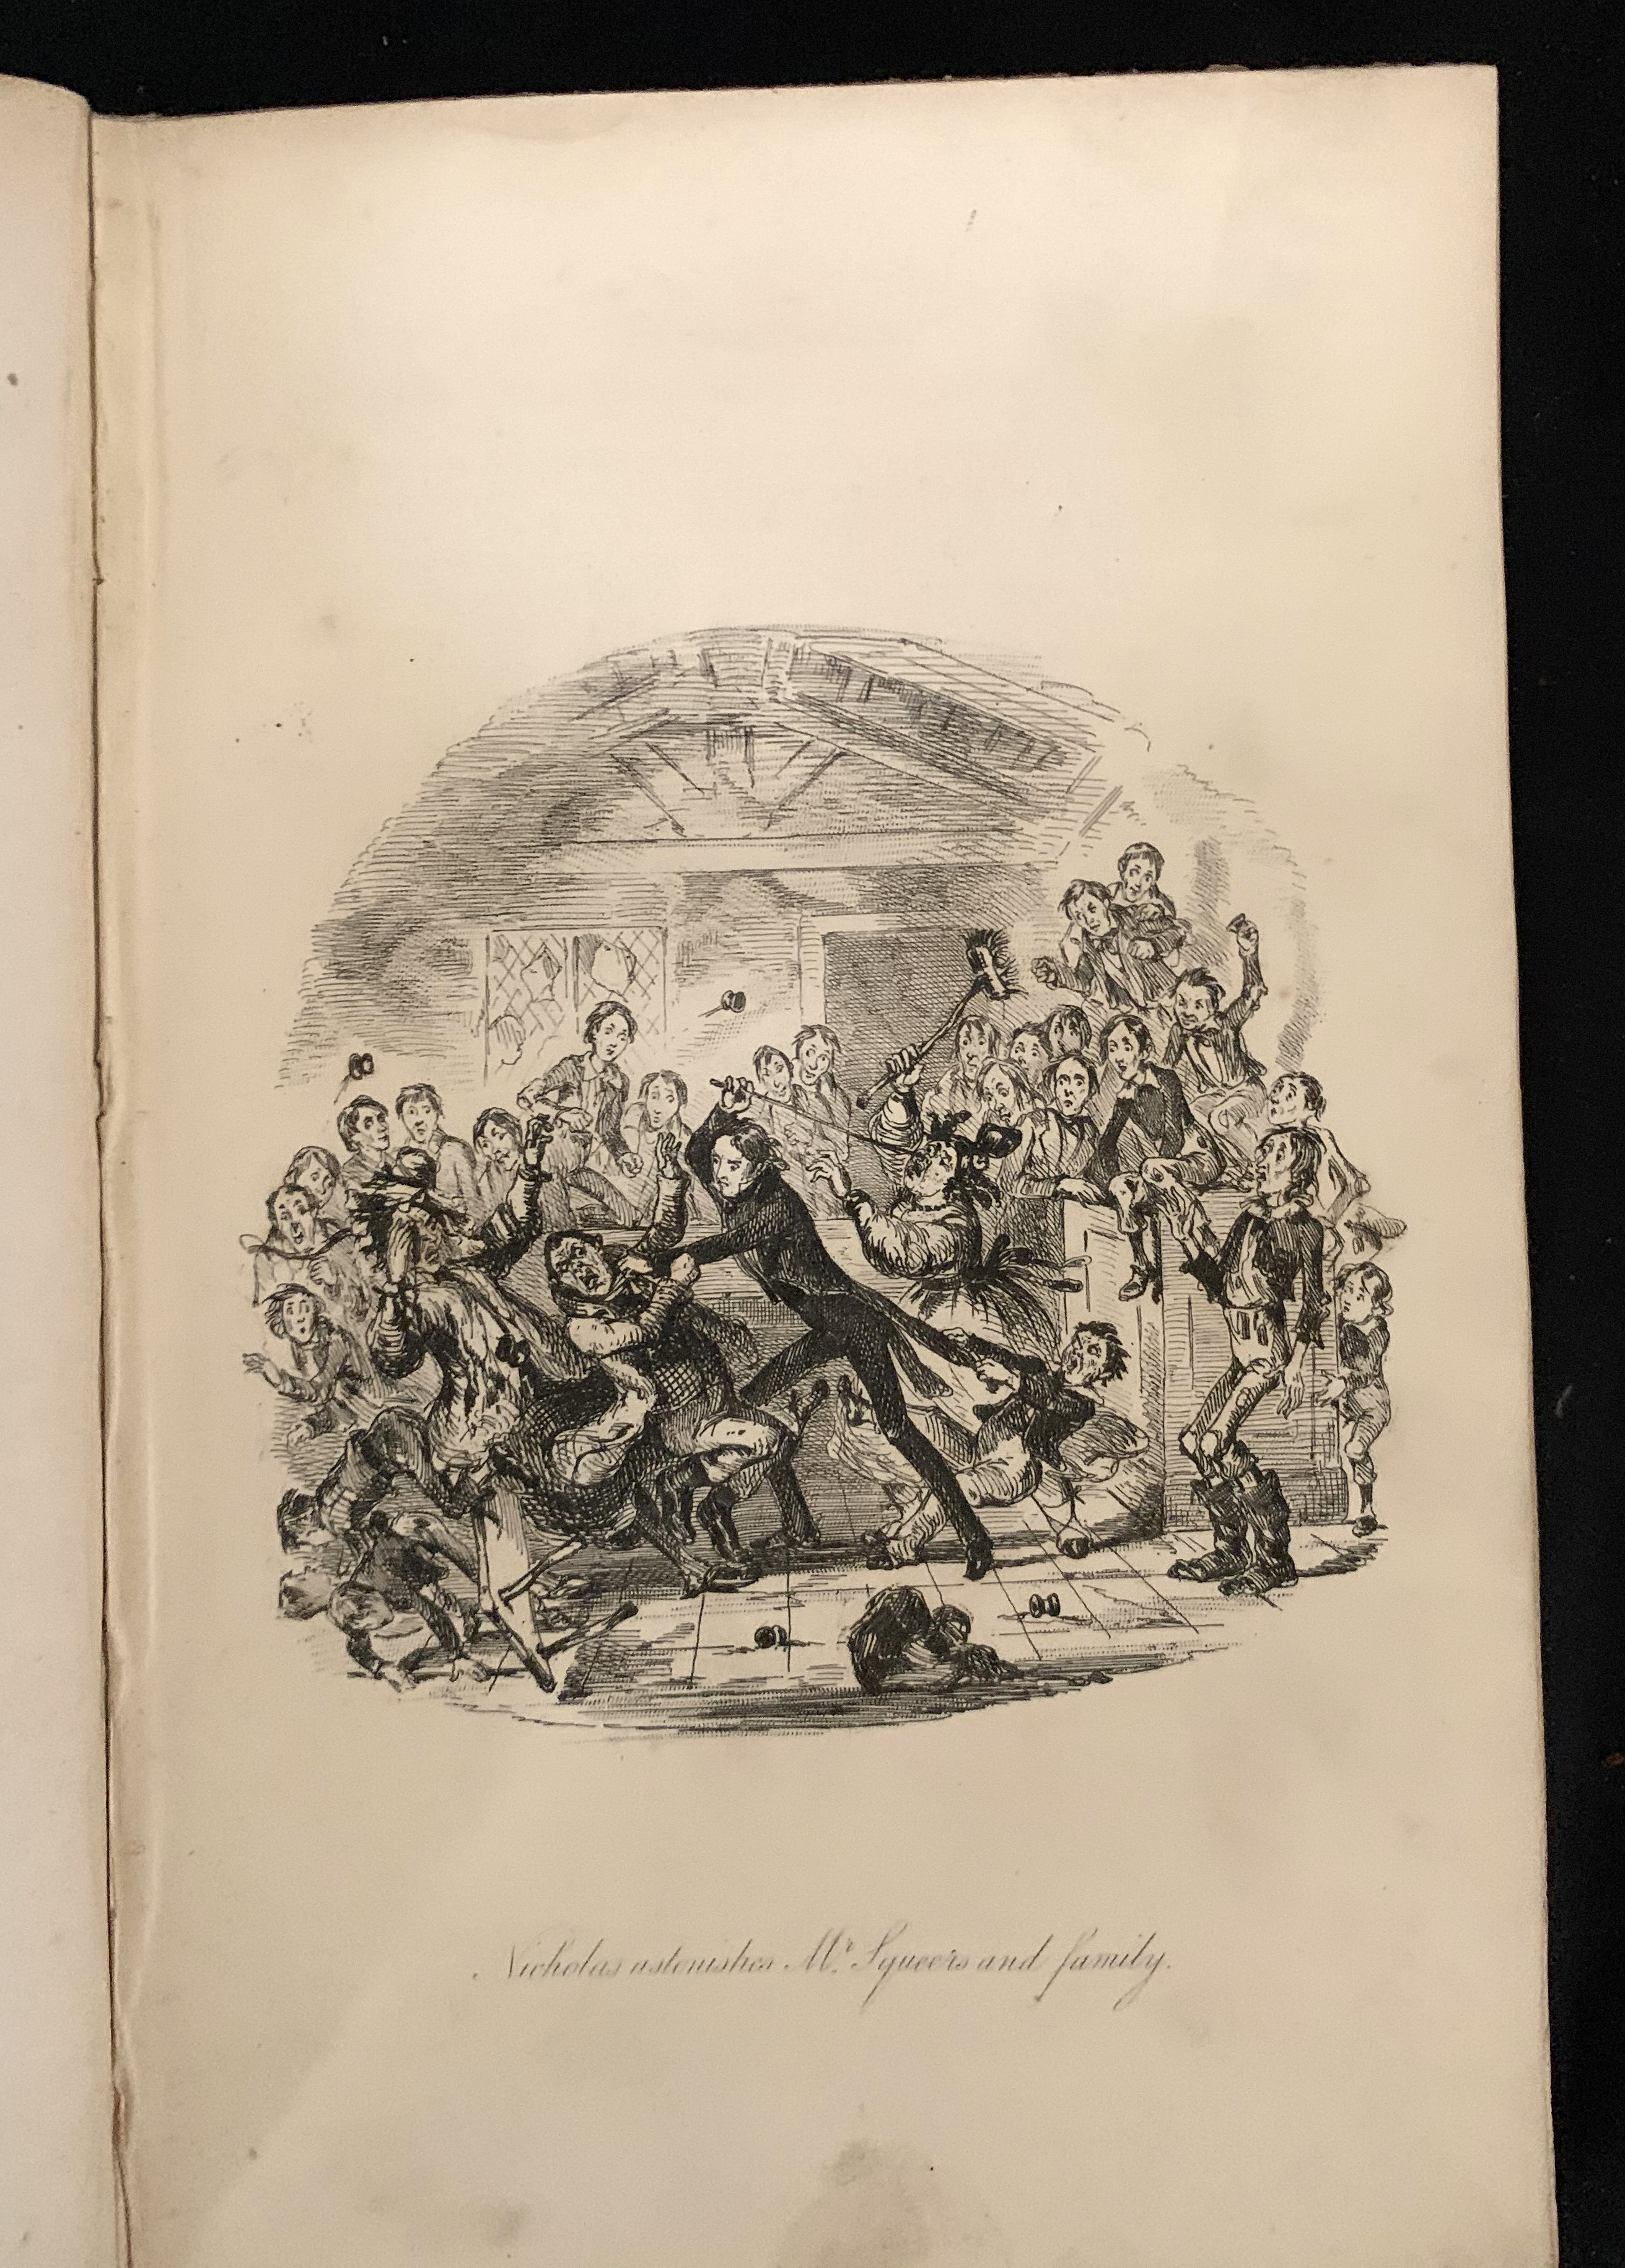 CHARLES DICKENS: THE LIFE AND ADVENTURES OF NICHOLAS NICKLEBY, ill H K Browne, "Phiz", London, - Image 3 of 3